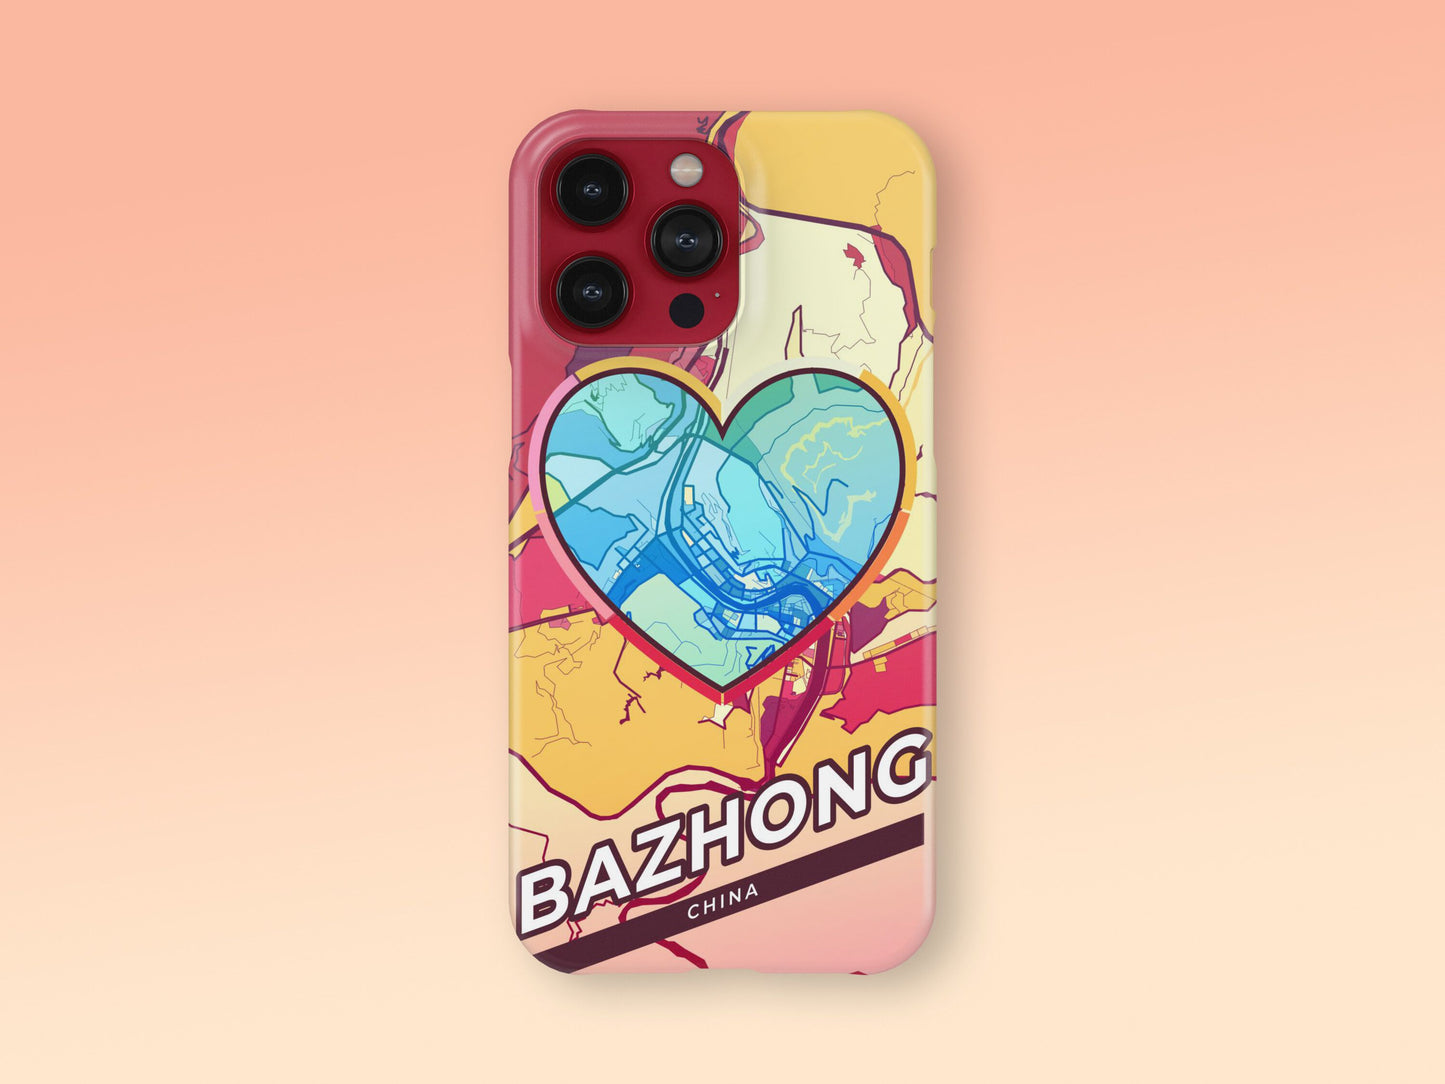 Bazhong China slim phone case with colorful icon. Birthday, wedding or housewarming gift. Couple match cases. 2